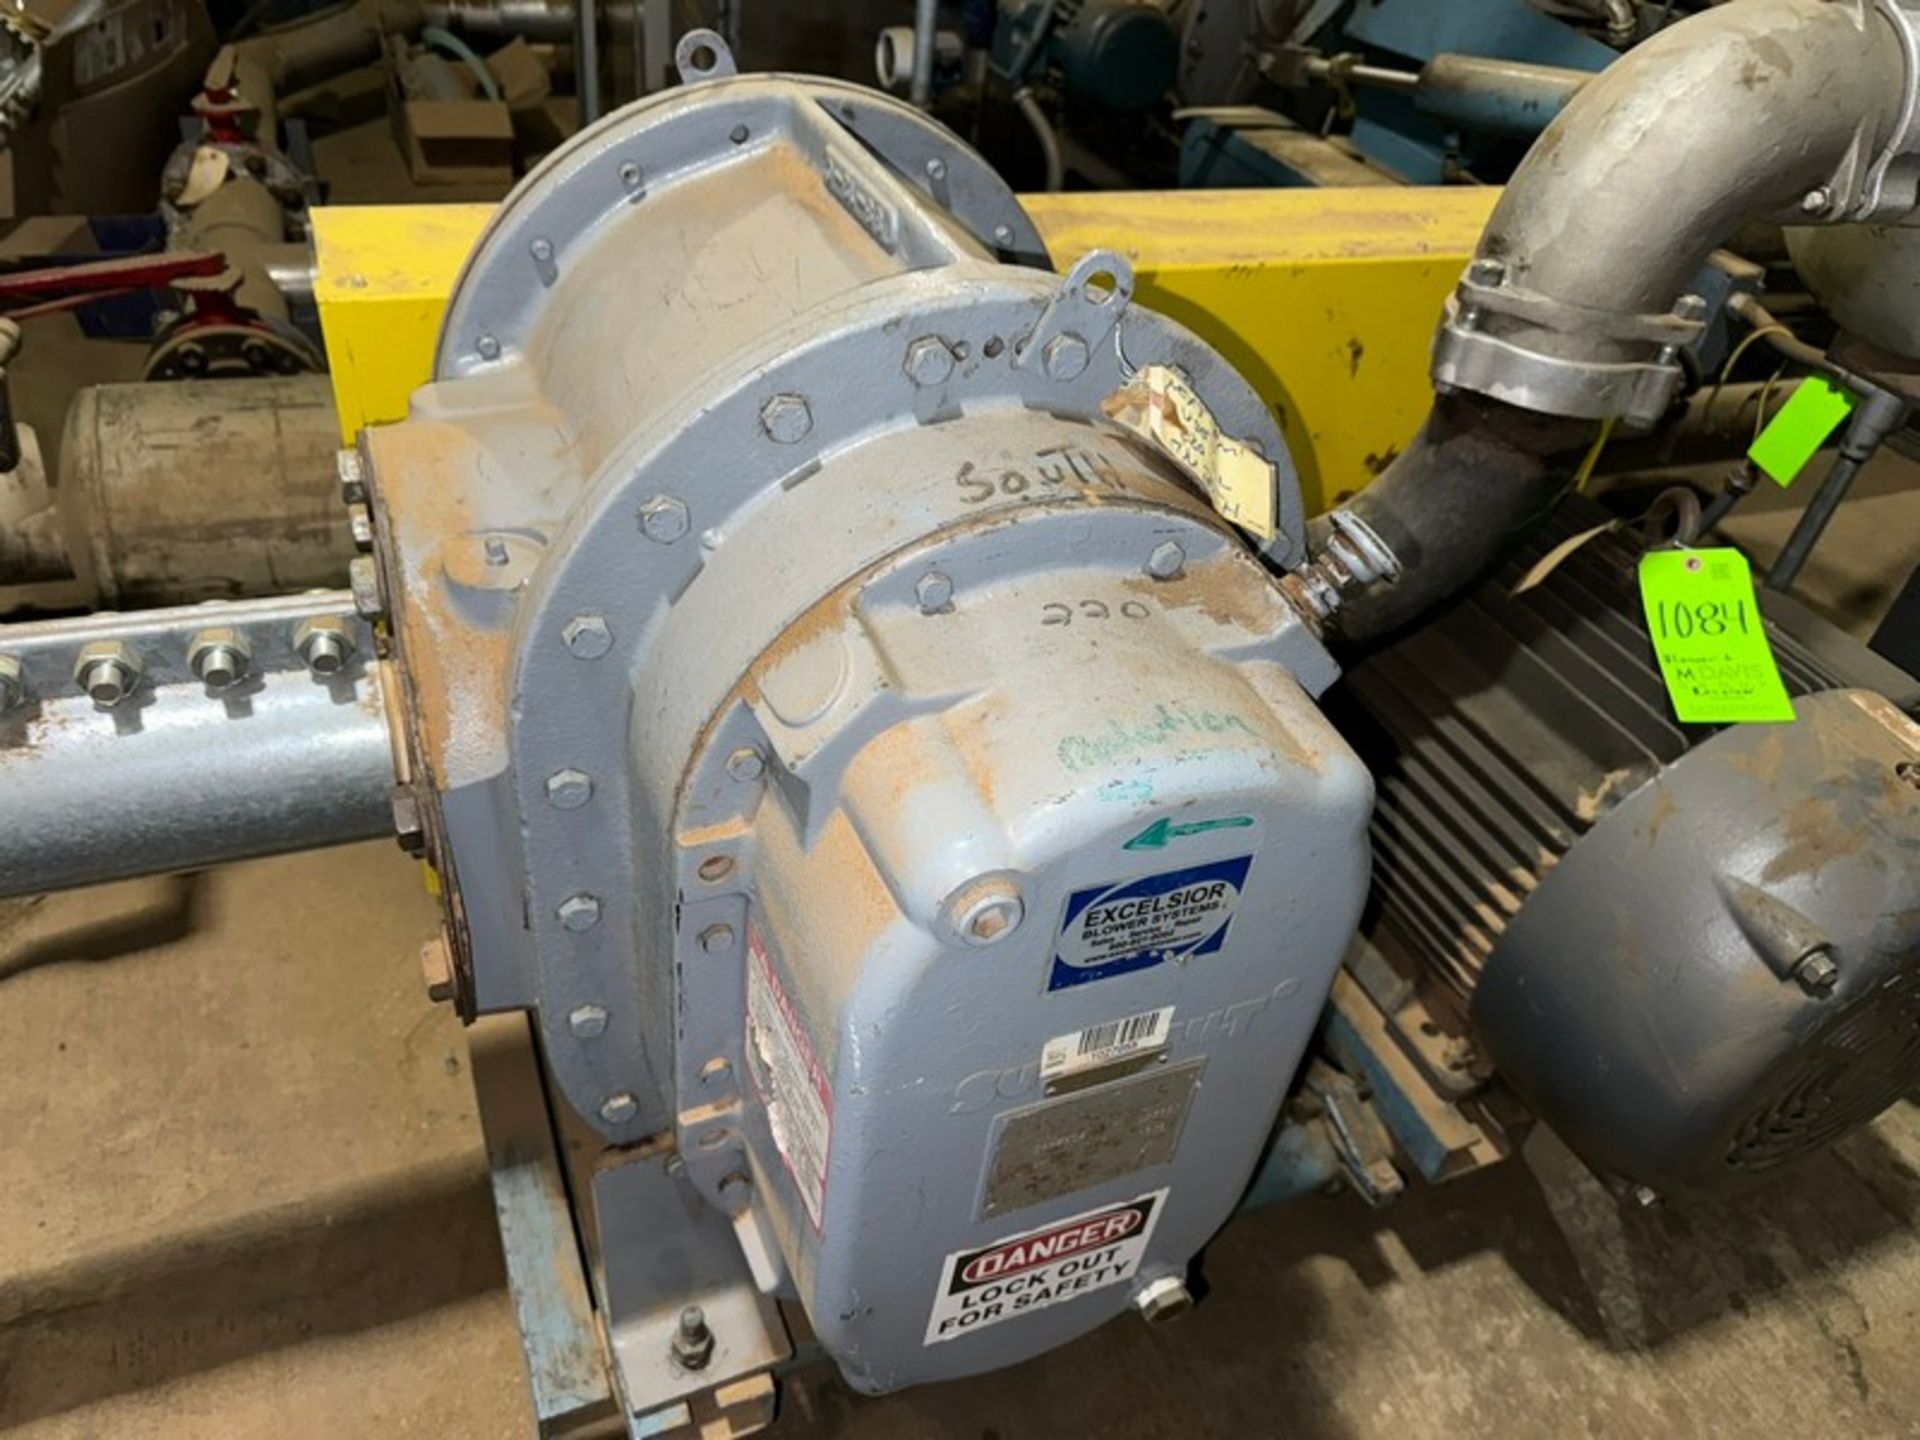 Exscelsior 50 hp Blower Unit, with Baldor Motor, 230/460 Volts, 3 Phase, with Horizontal Receiving - Image 7 of 9